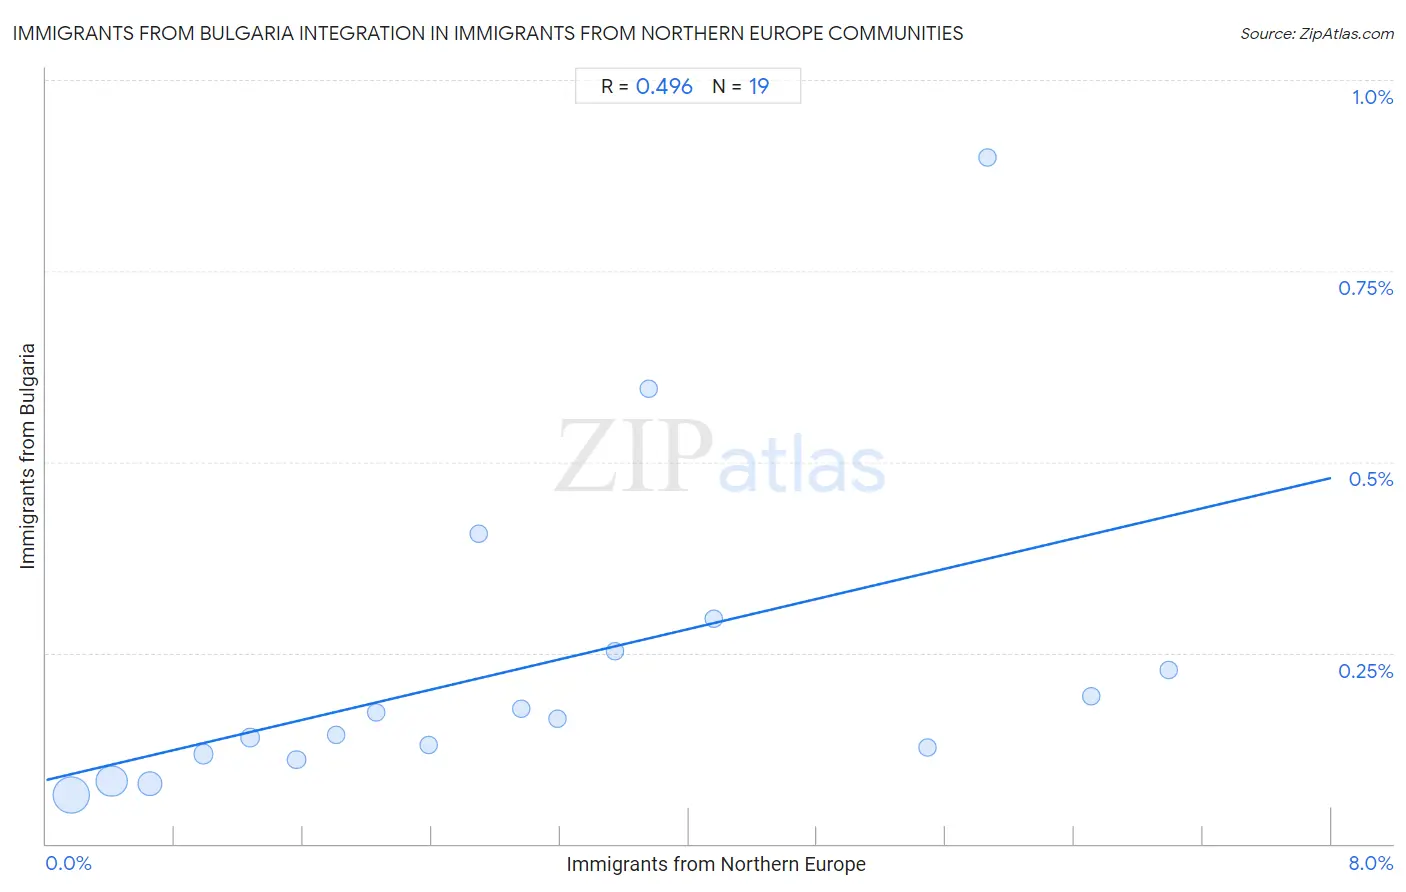 Immigrants from Northern Europe Integration in Immigrants from Bulgaria Communities